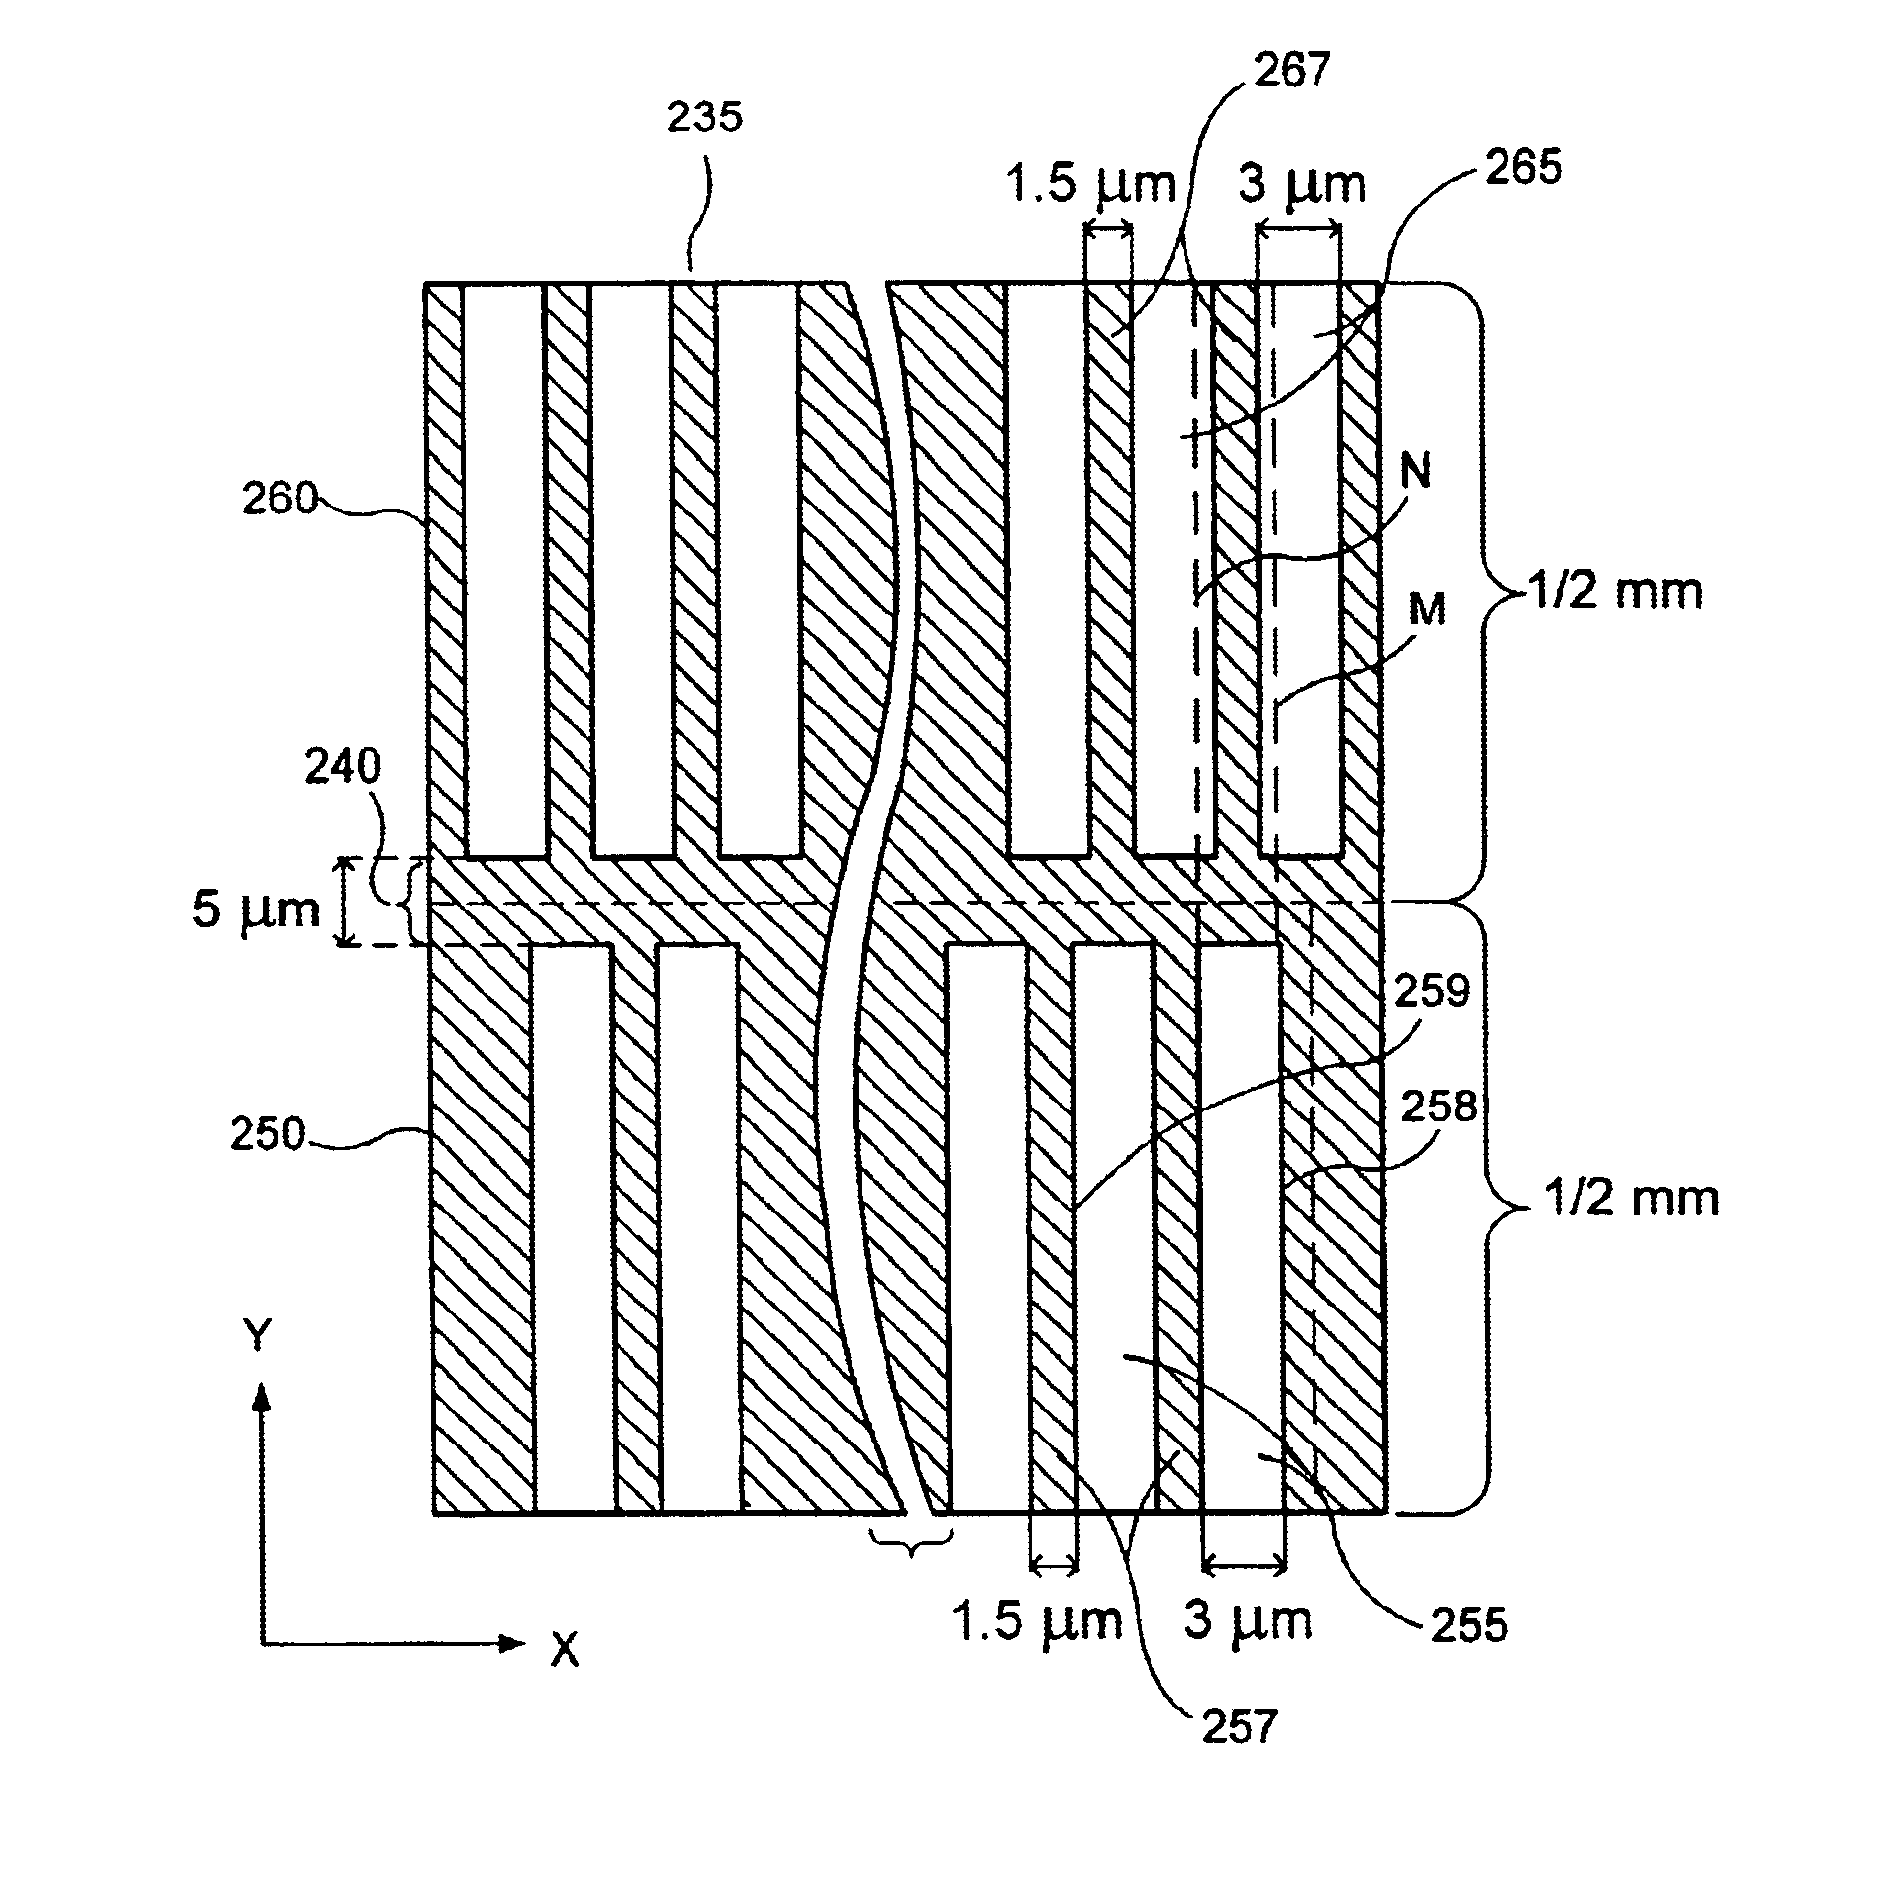 Method and system for providing a single-scan, continuous motion sequential lateral solidification